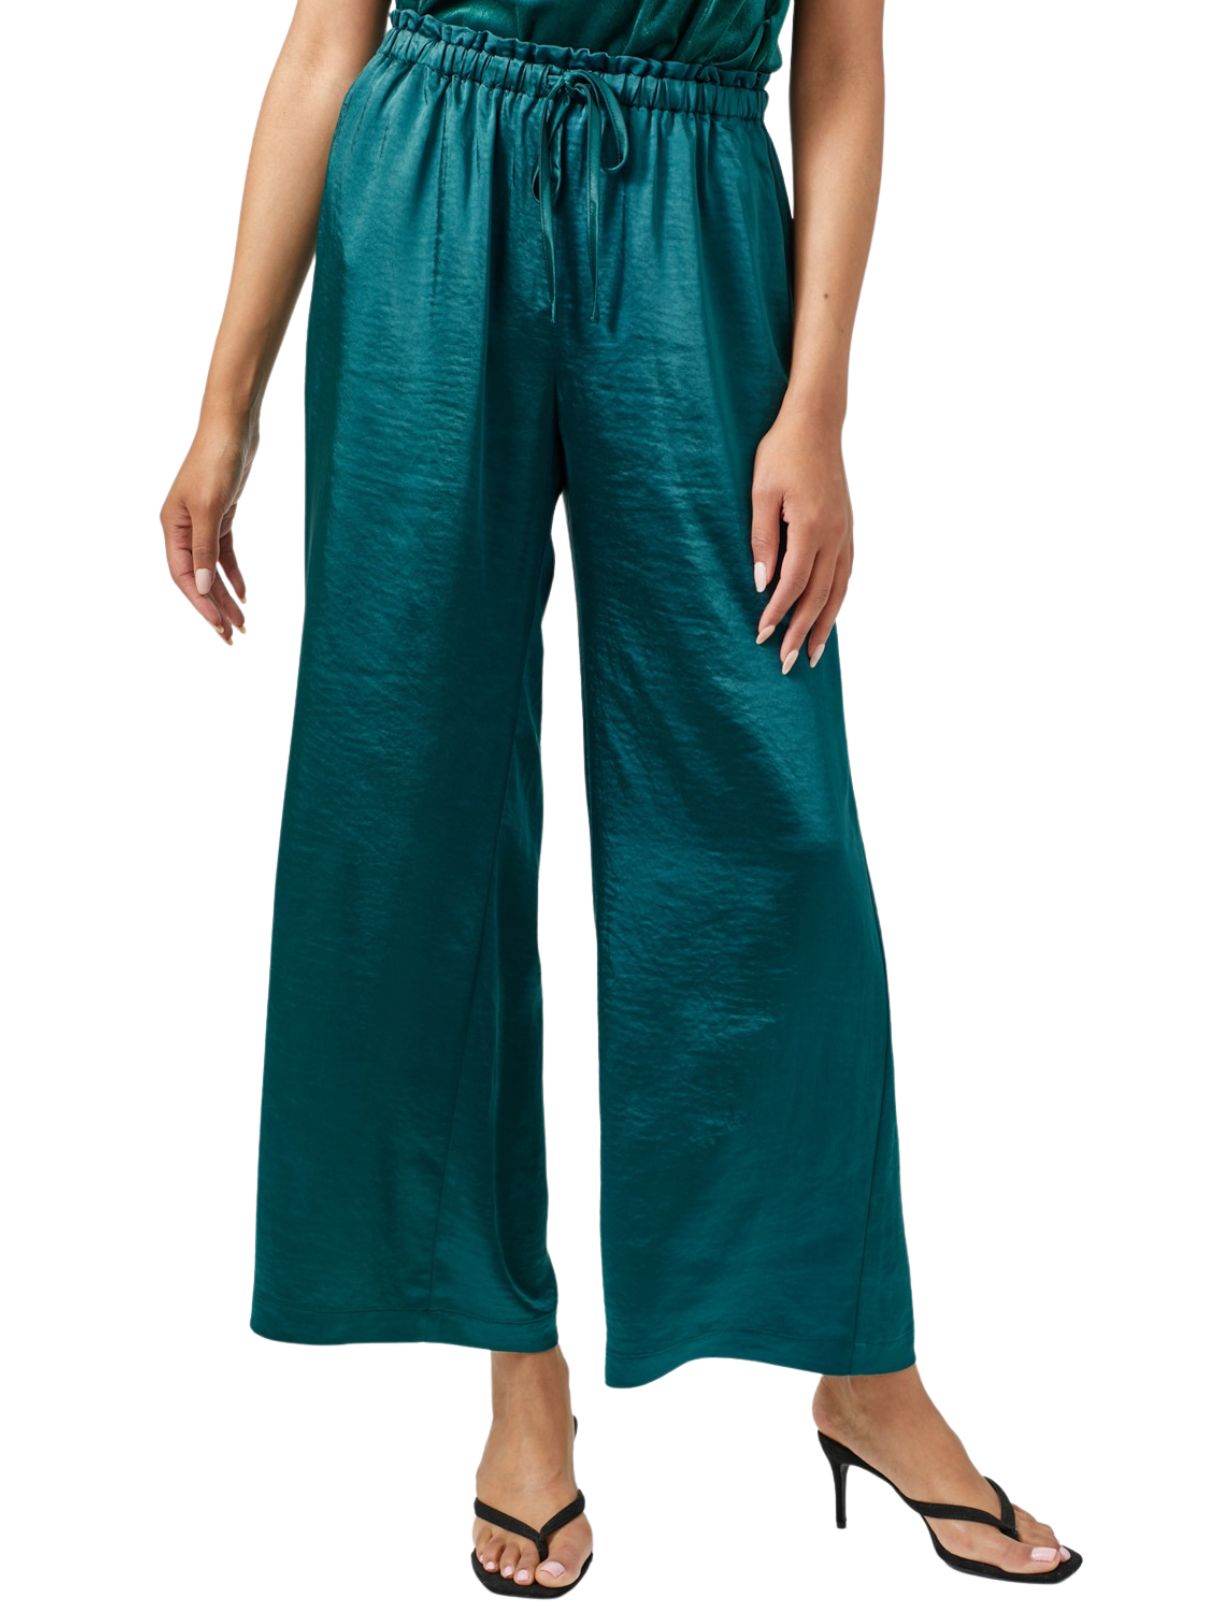 Satin Wide Leg Pant in Teal | Cotton Island Women's Clothing Boutique